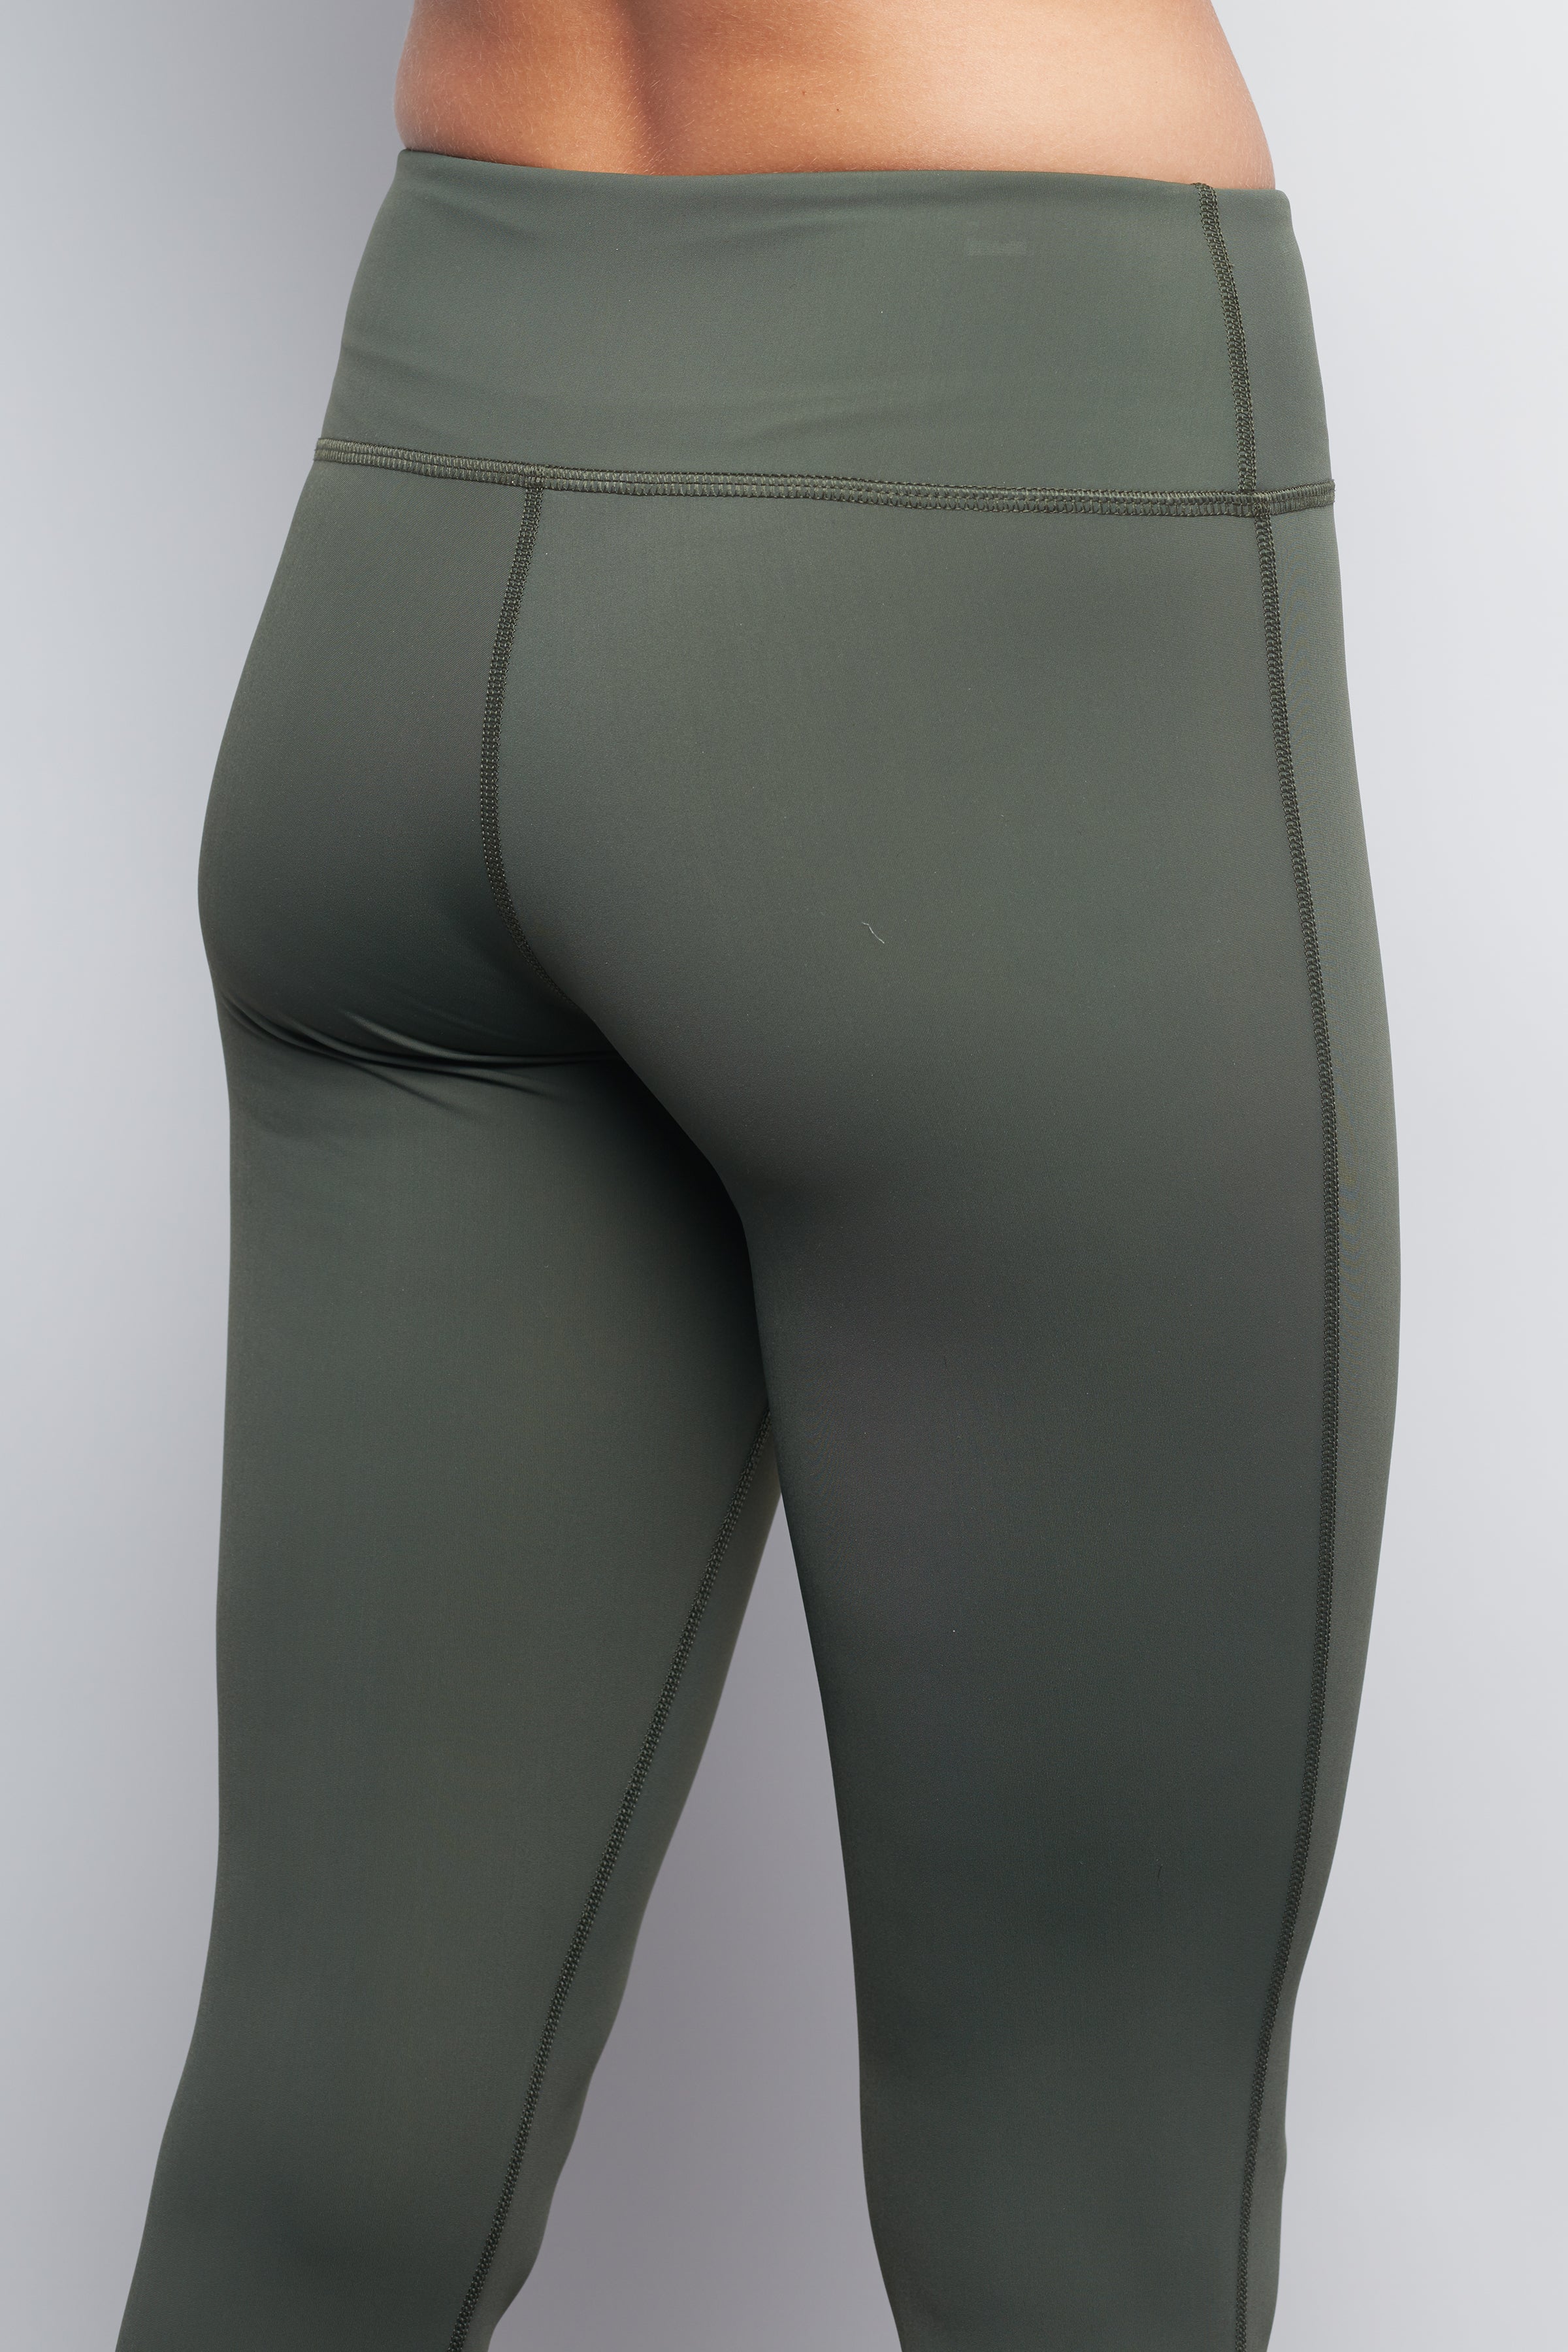 Sage Collective Kate High Rise 7/8 Leggings In Shark